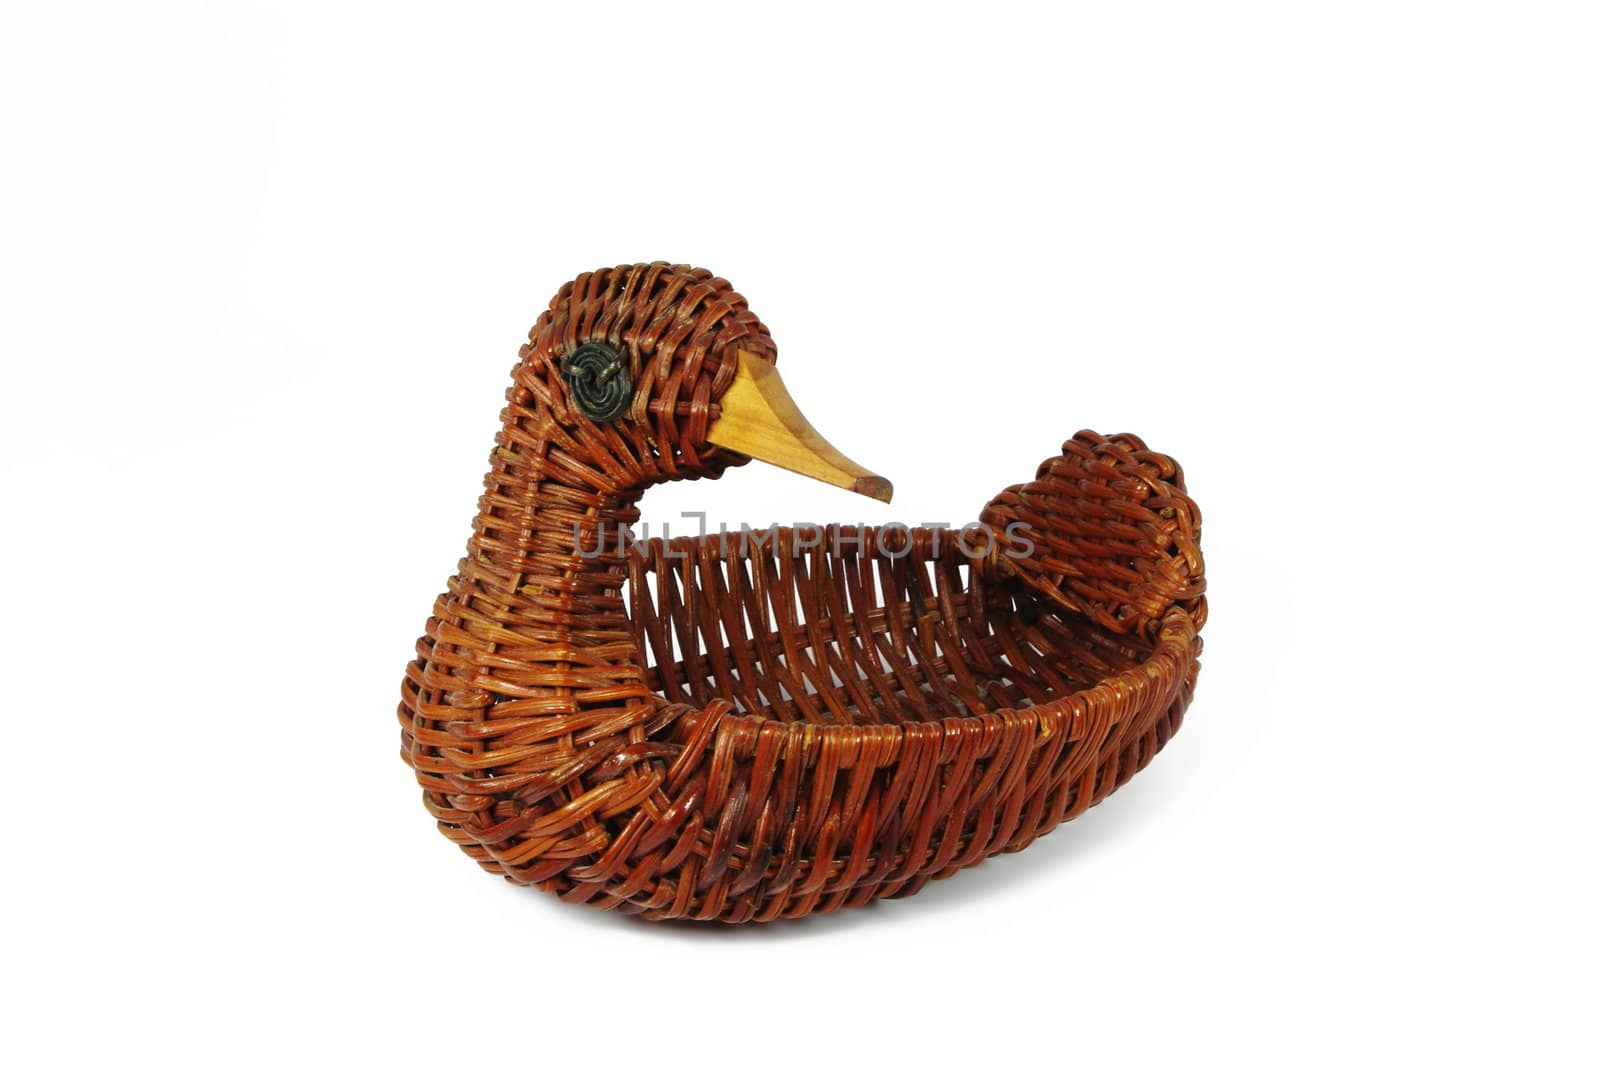 Wicker contaimer in form of duck by Vitamin